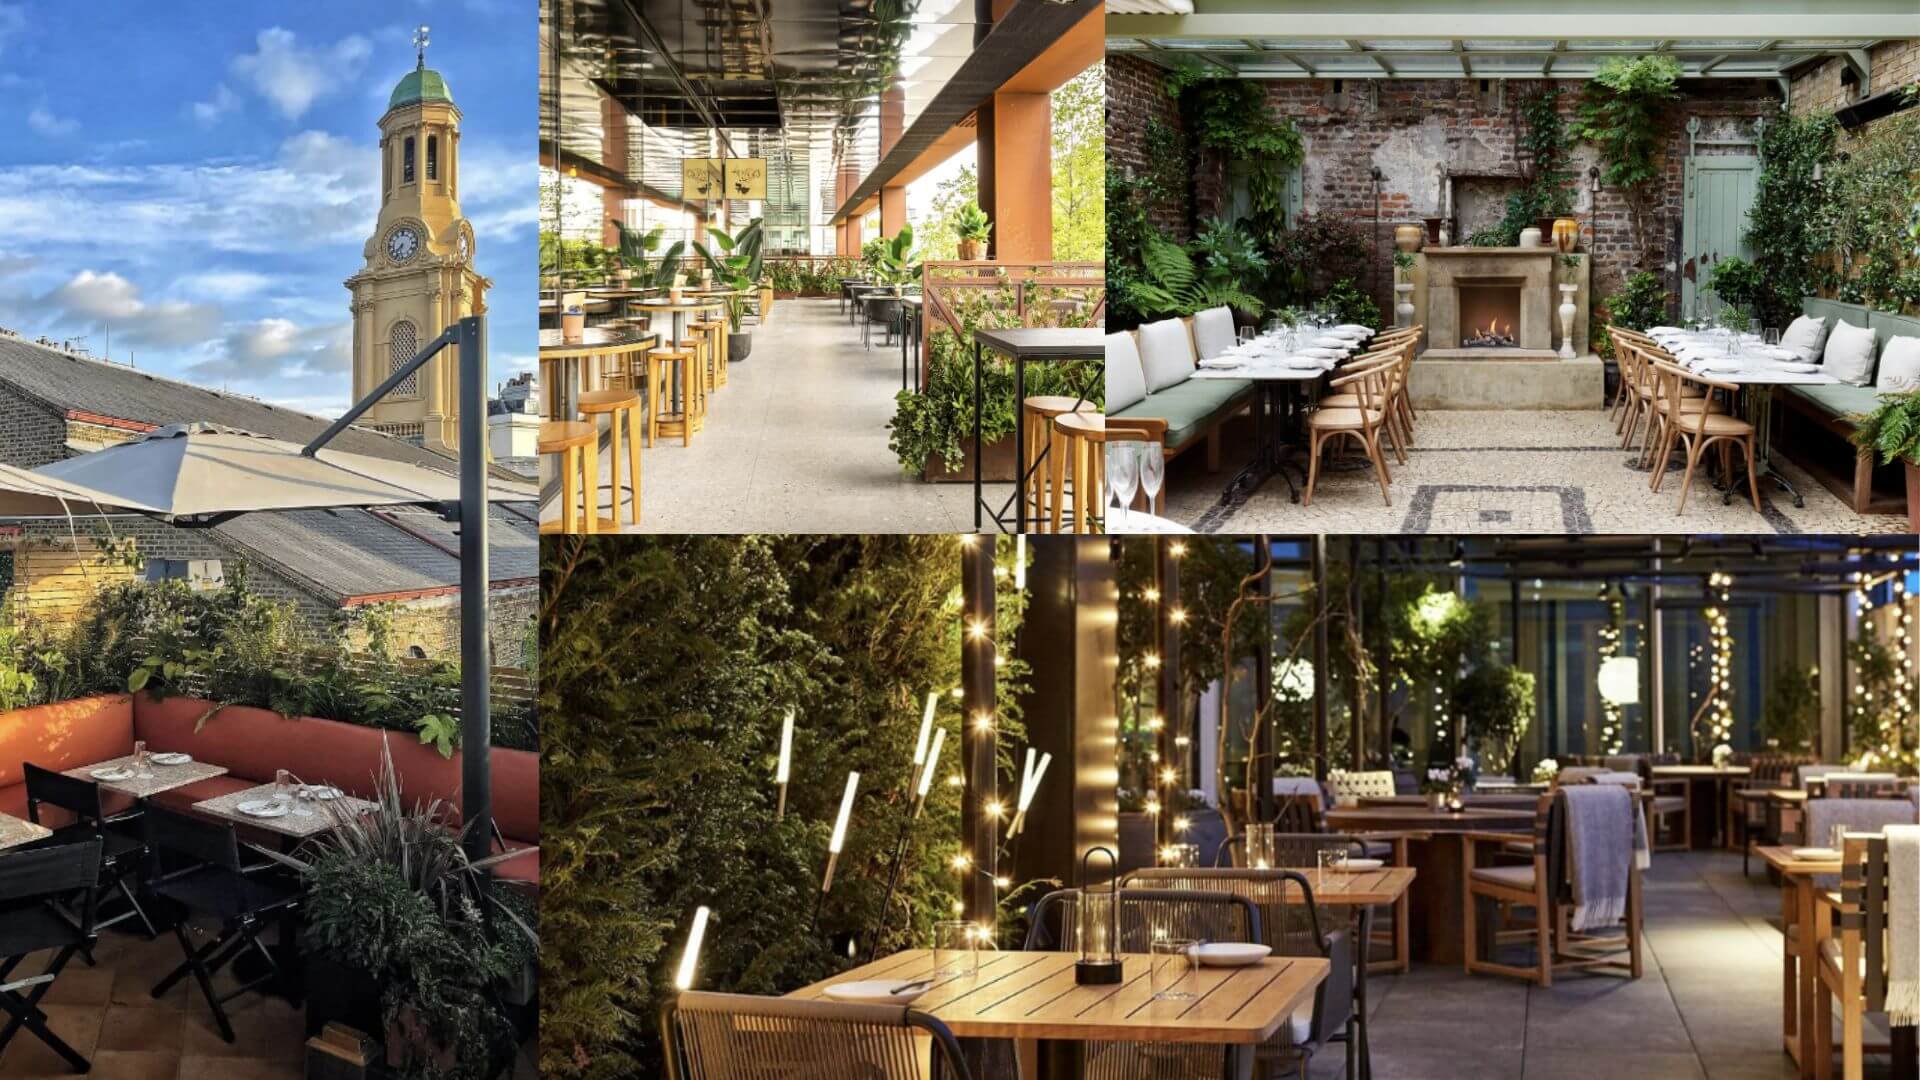 Collage of outdoor restaurants in London showcasing the lovely use of lighting and plants with outdoor furniture to create an inviting and relaxing dining experience.